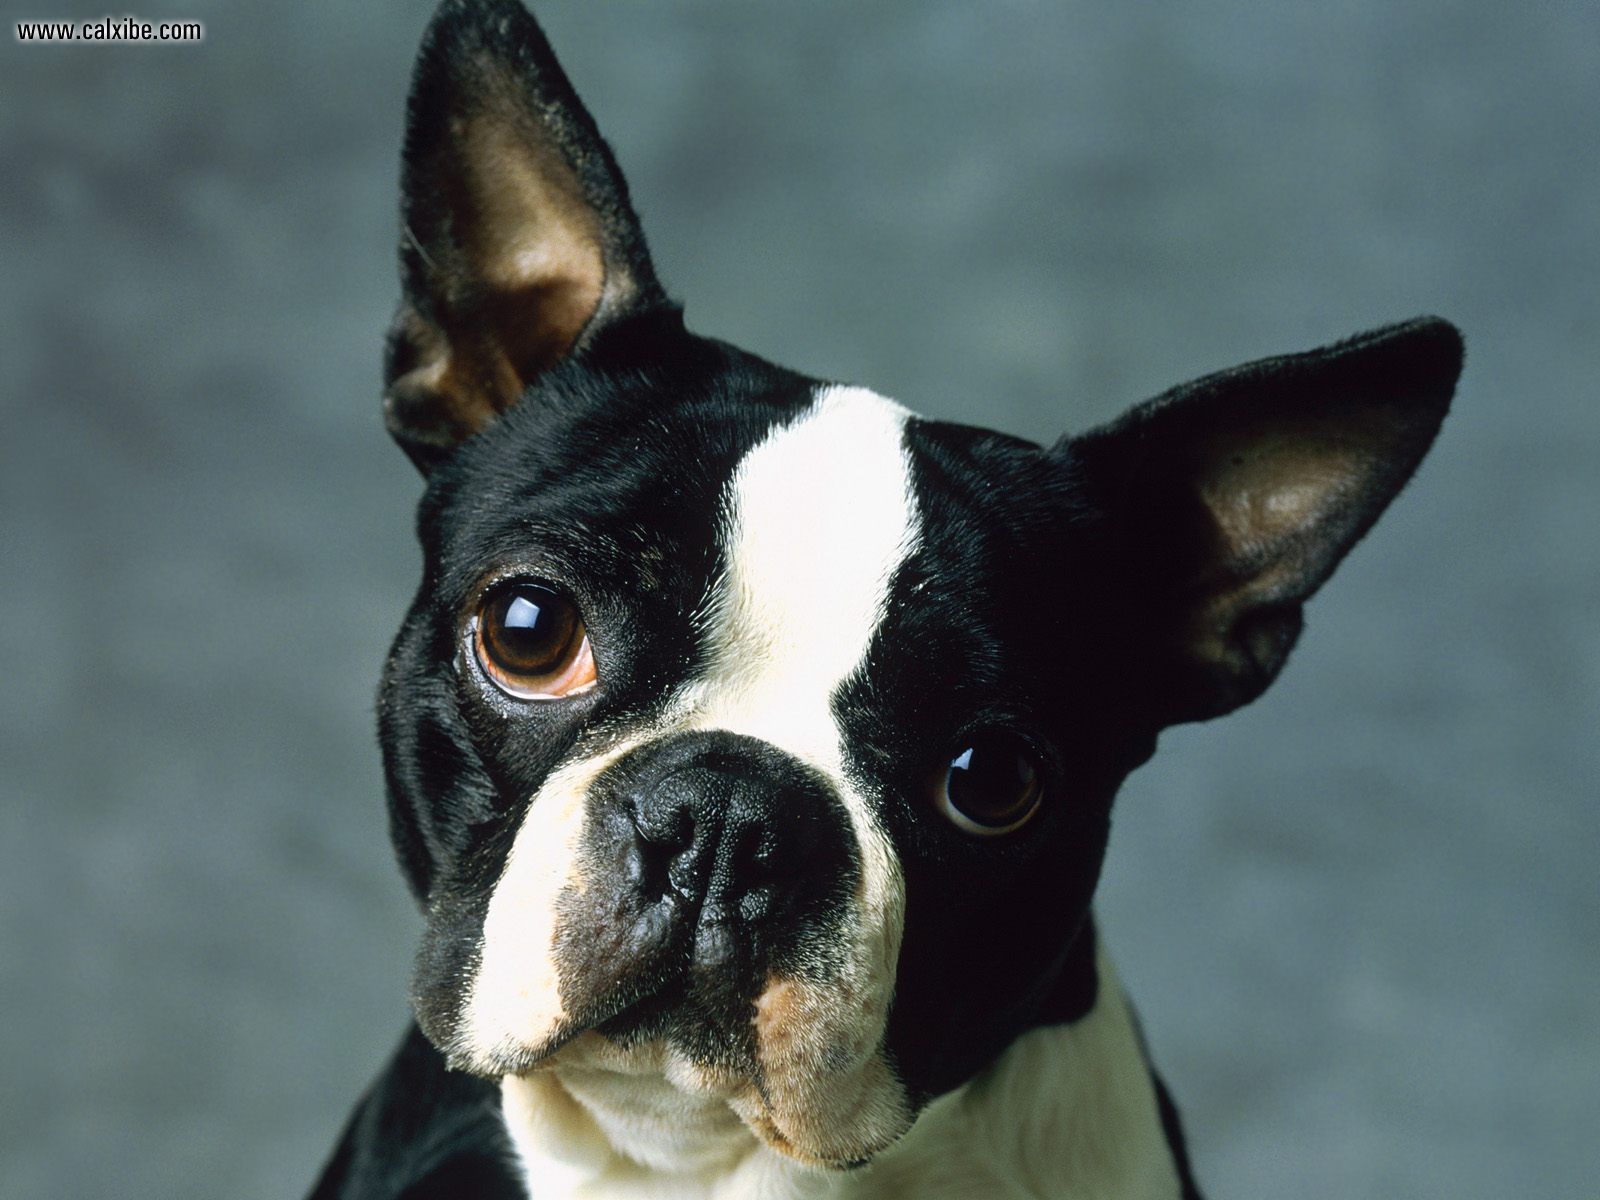 Animals: Boston Terrier, picture nr. 14229